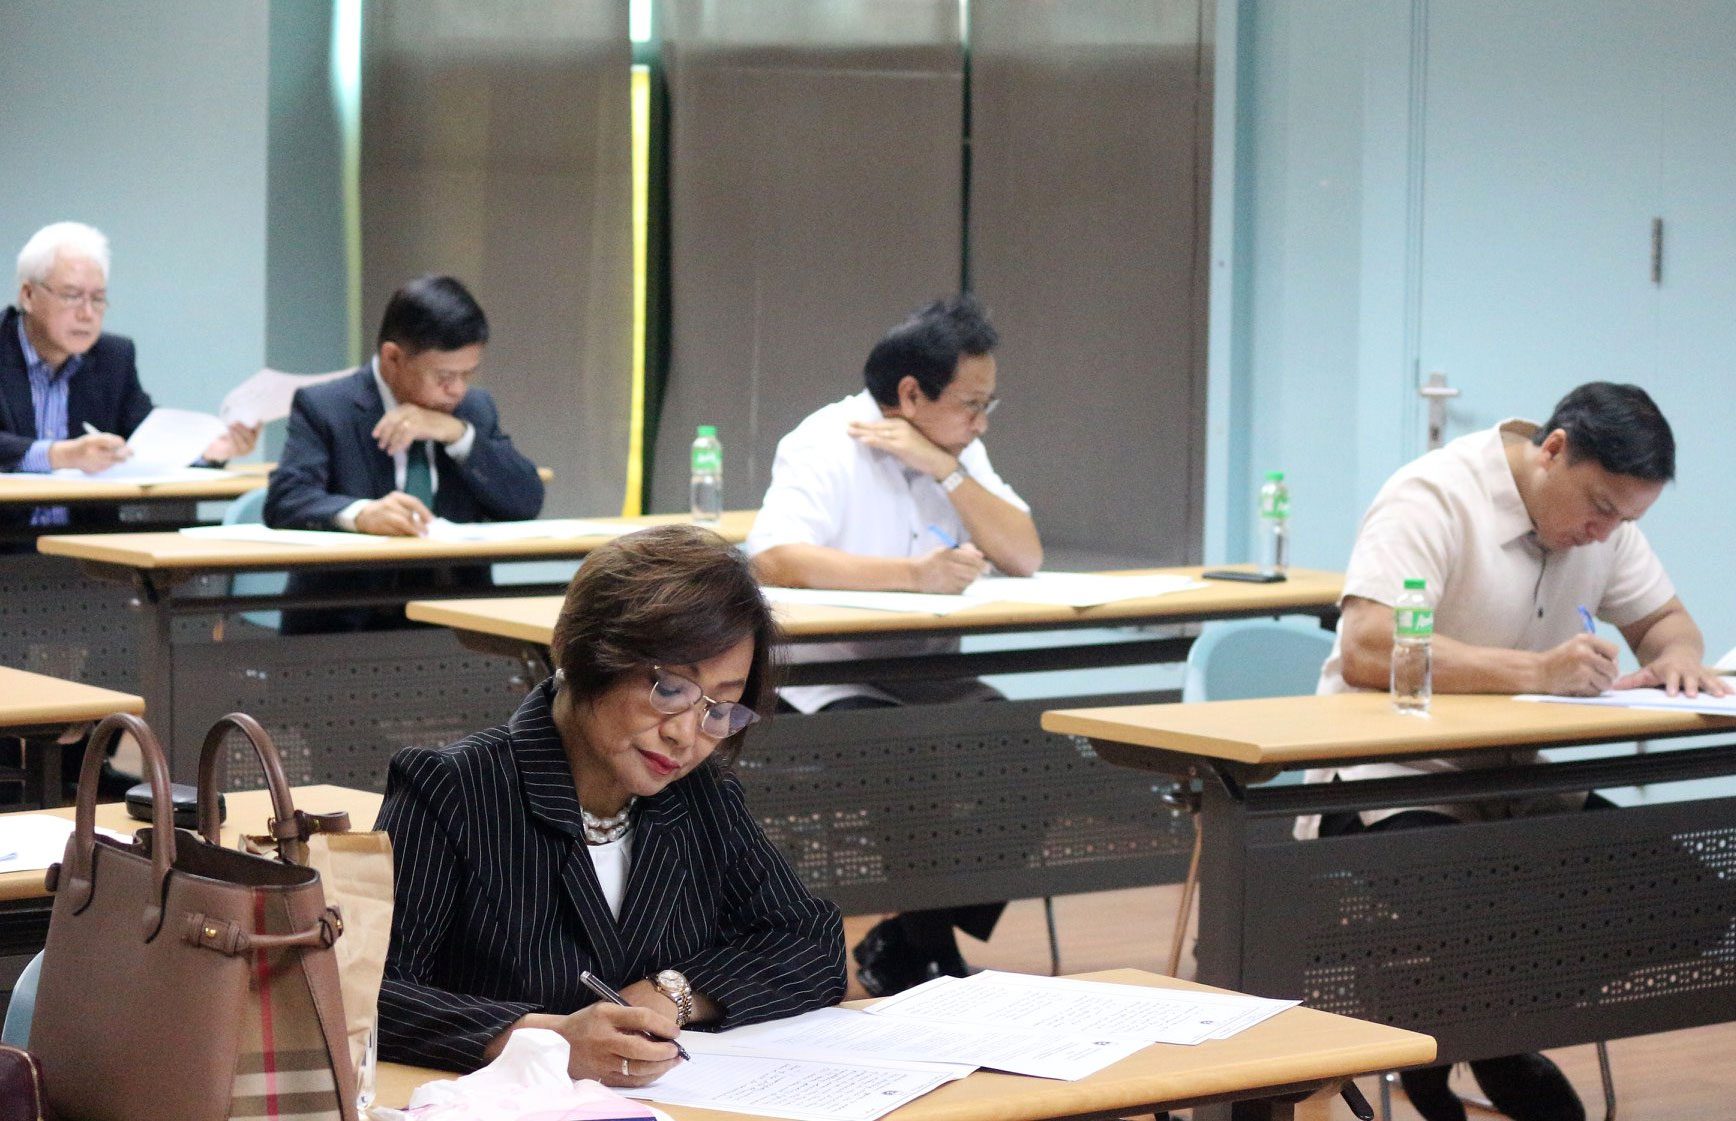 LOOK: Justices take essay-writing exam for Supreme Court application